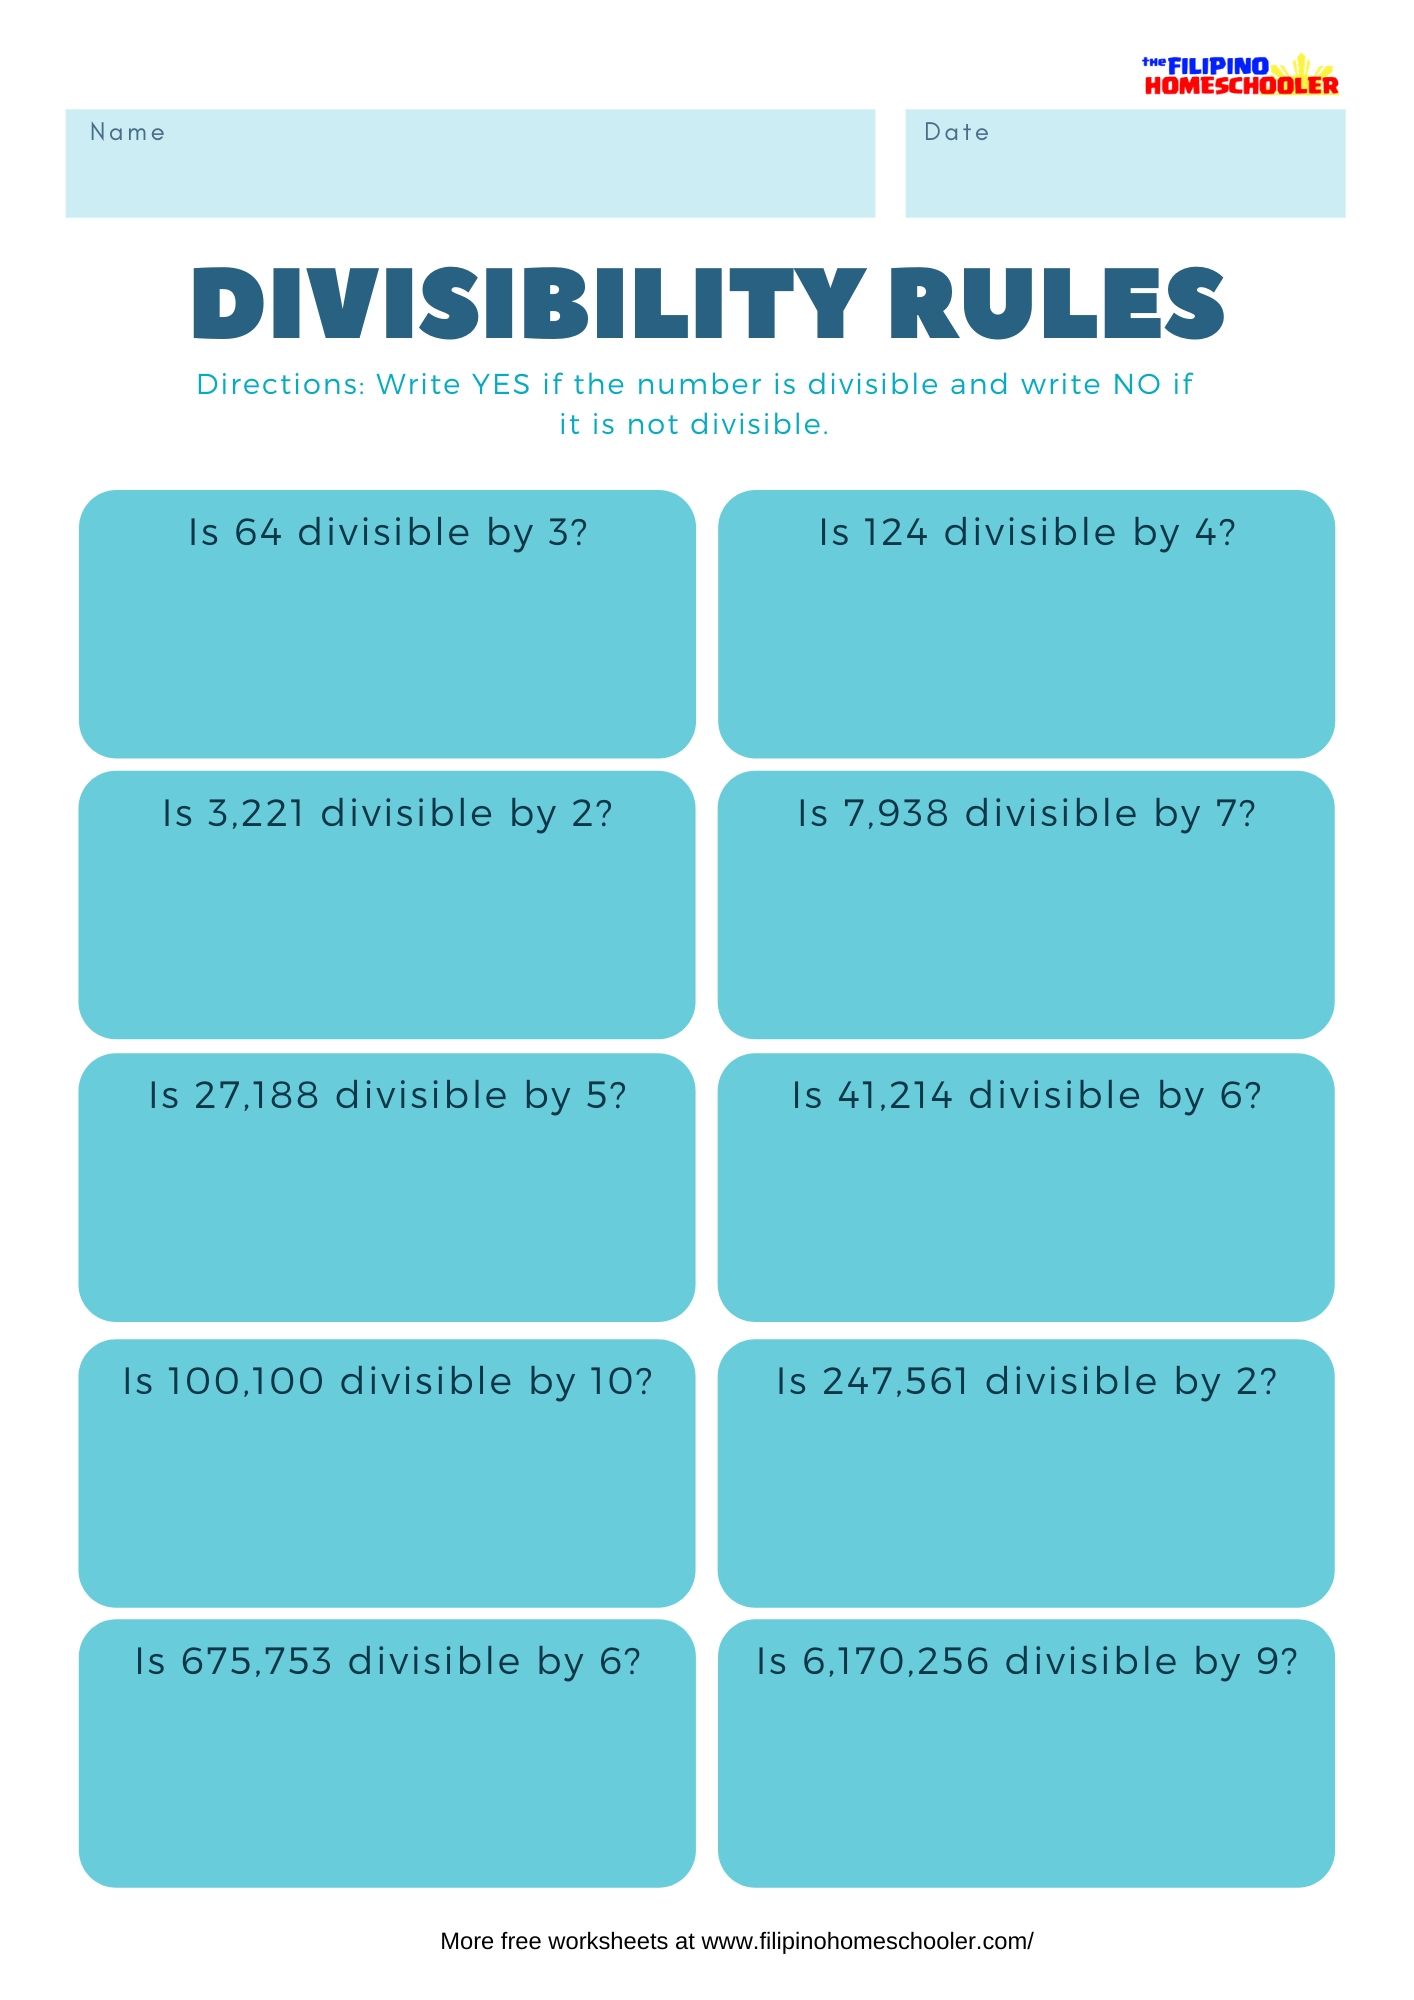 Divisibility Rules Worksheets (Set 1) — The Filipino Homeschooler